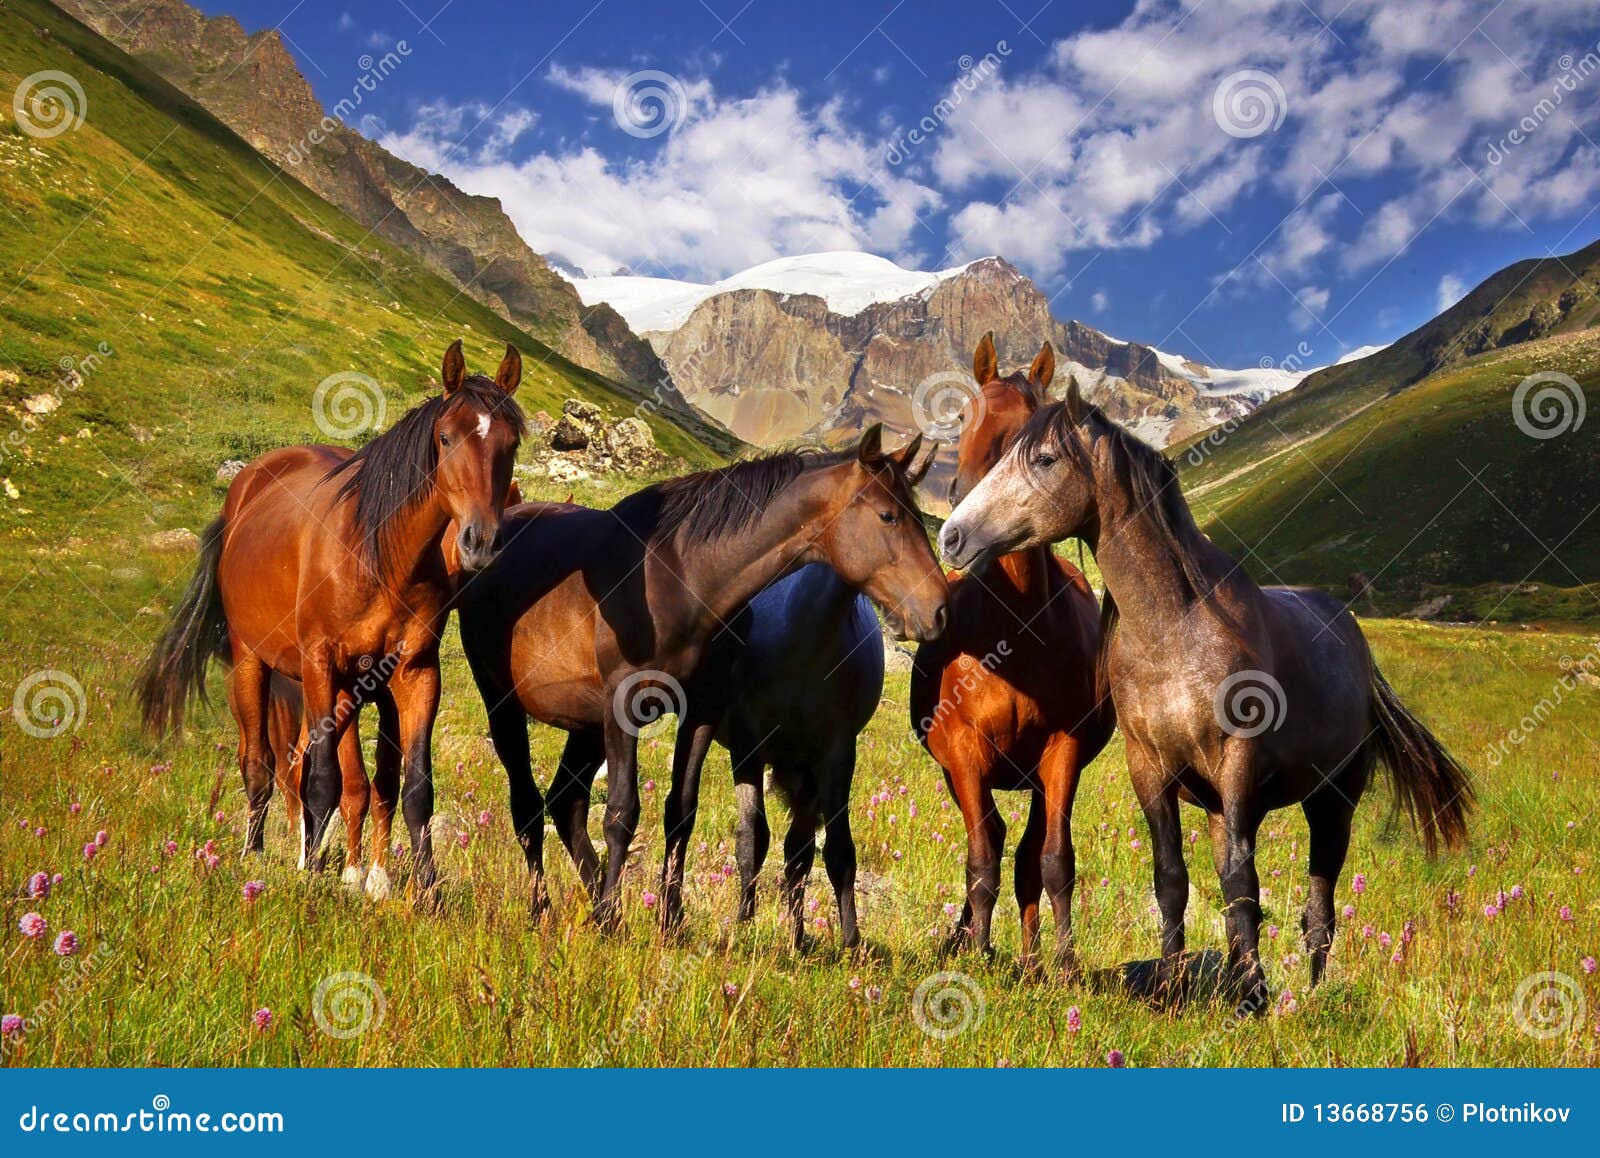 picturesque mountain landscape with horses